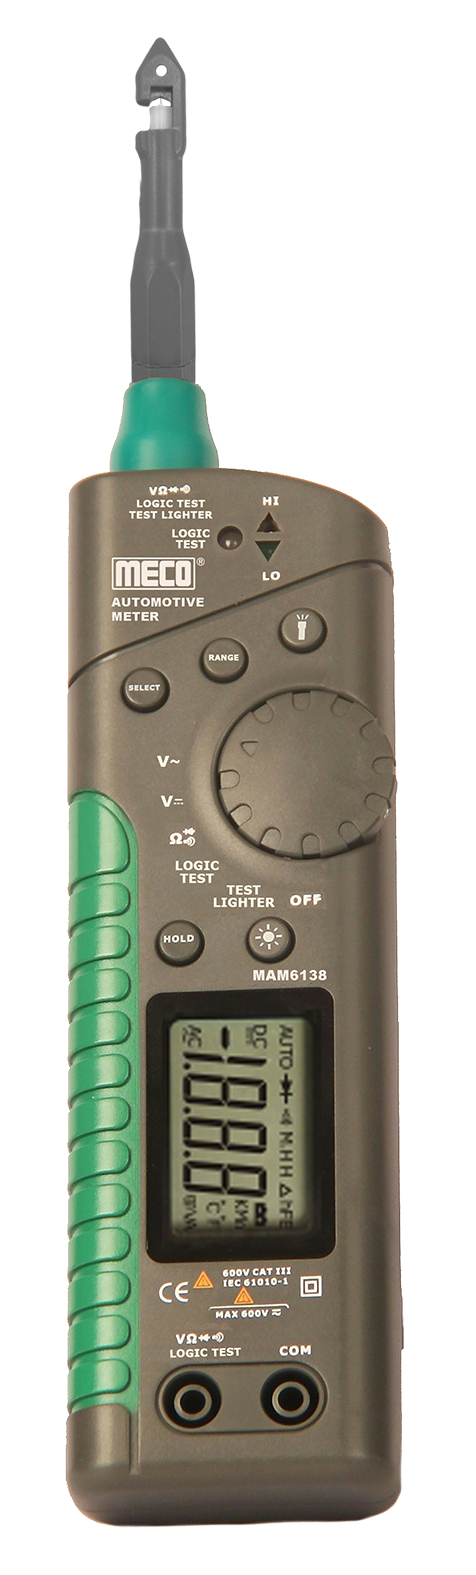 Multi-function automotive meter from Meco